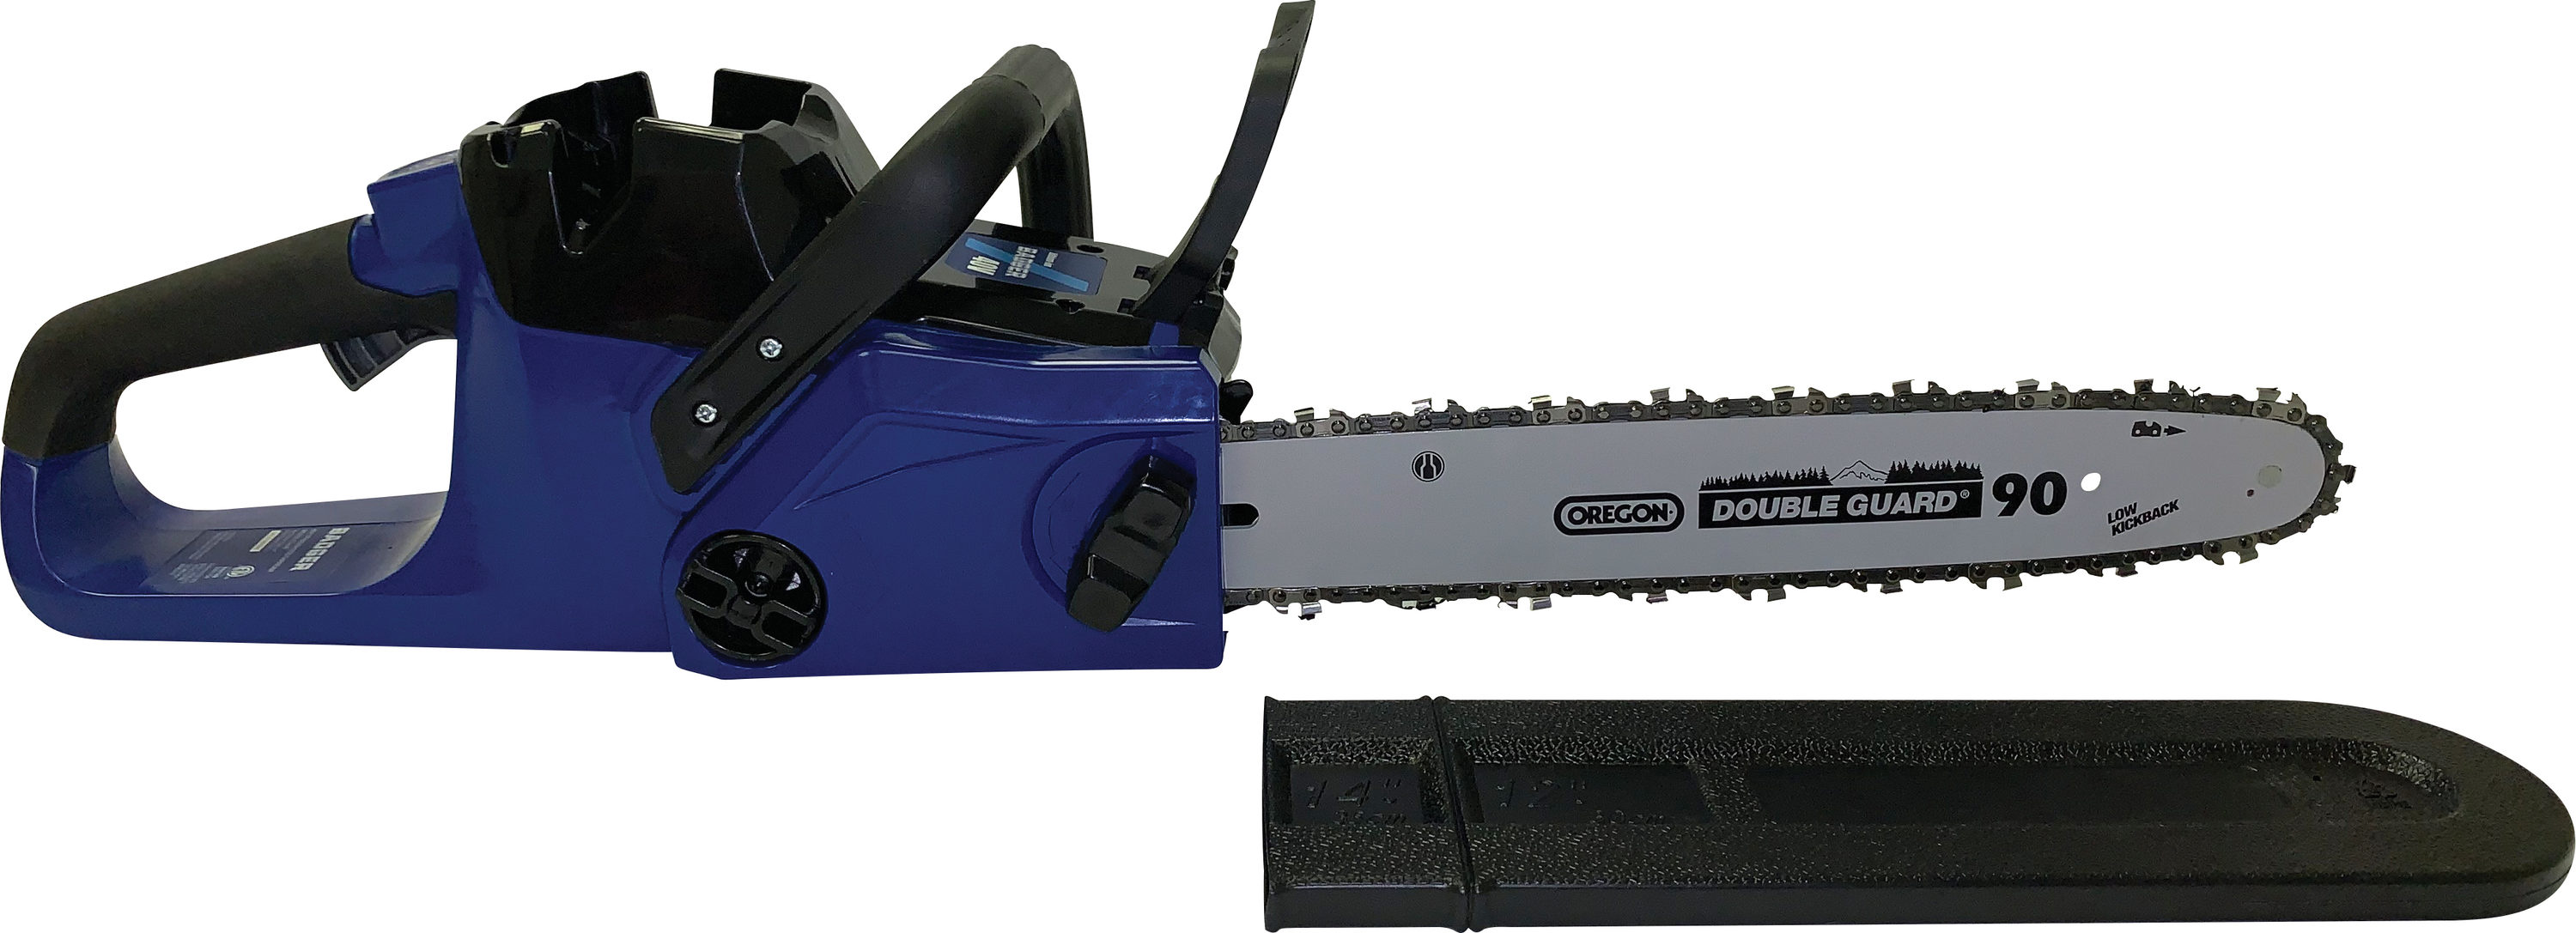 Badger 40-Volt Max 40-Volt Max 14-in Brushless Cordless Electric Chainsaw 4 Ah (Battery & Charger Included) on Sale At Lowe's